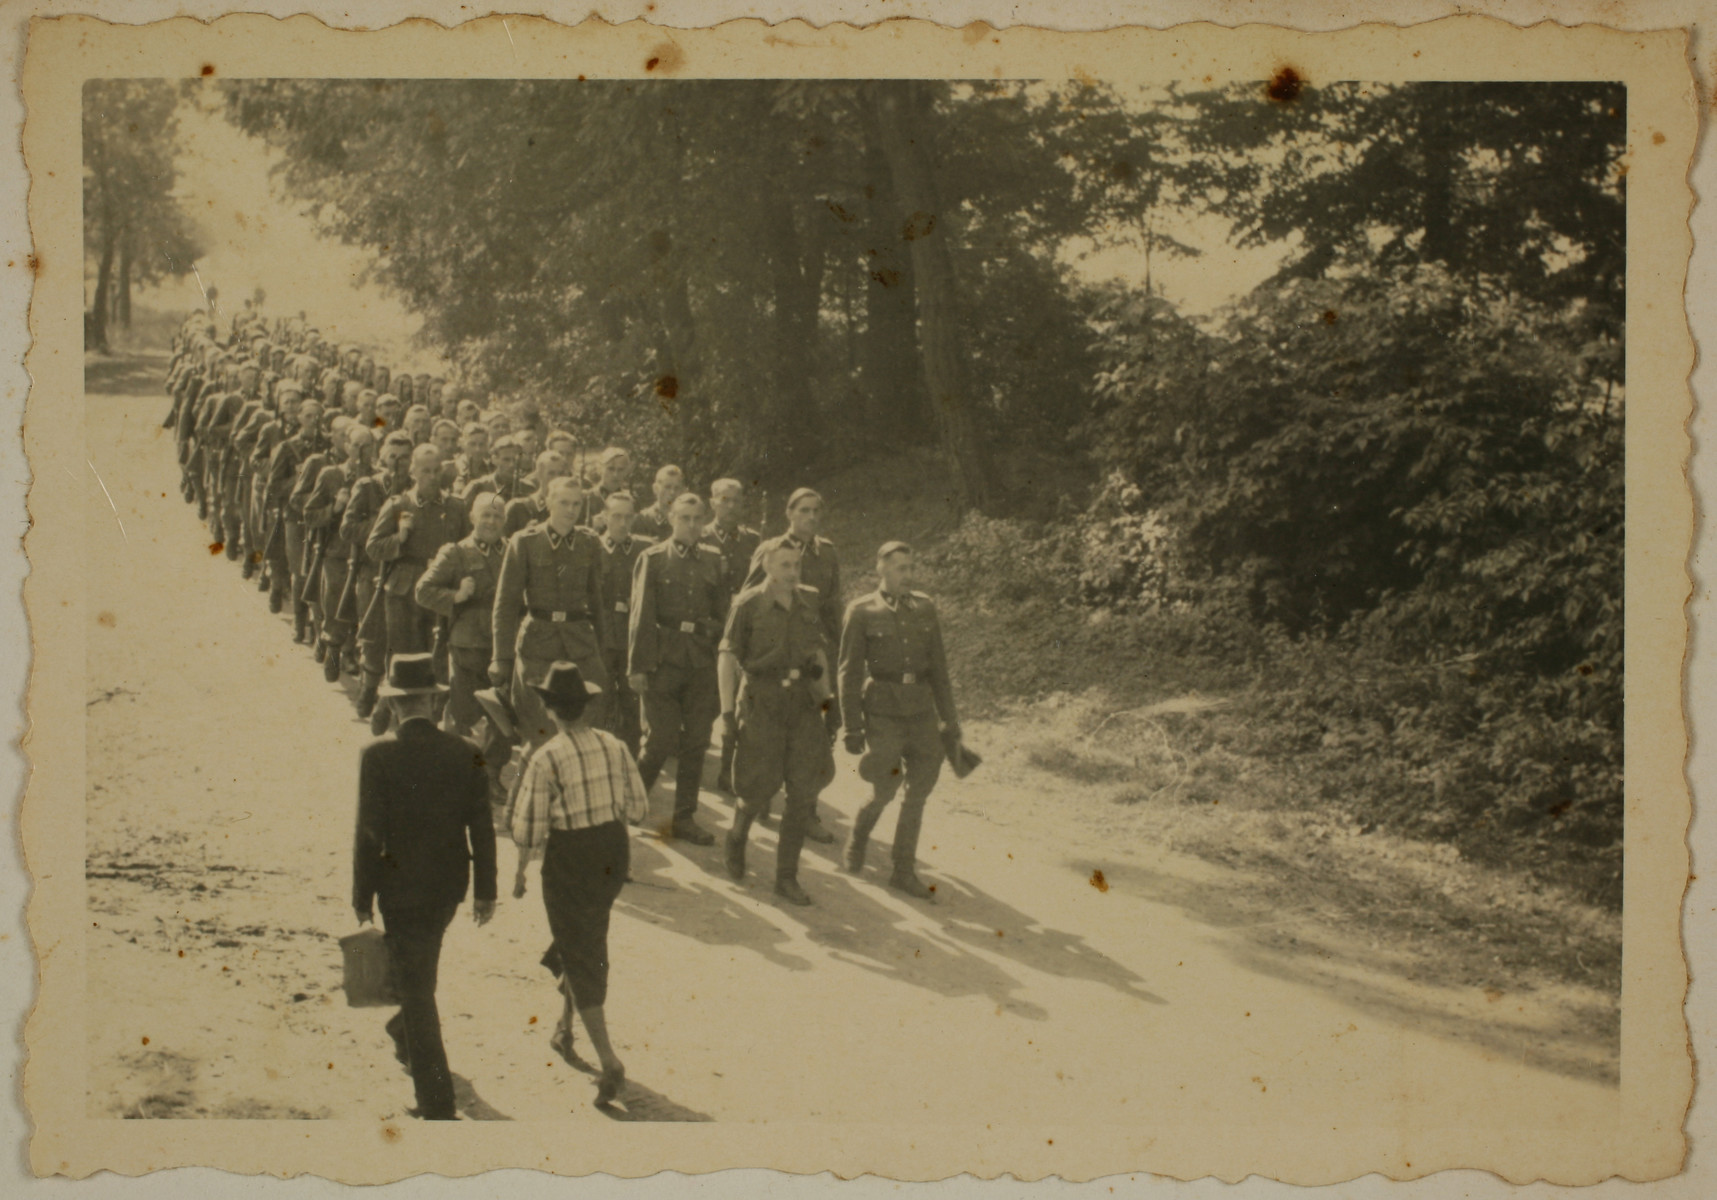 SS officers and enlisted men march to shooting practice. Two civilians walk in the opposite direction.

The original caption reads "Mit den Kdtr.-Stab auf dem Marsch zum Schiessstand" (on the march with the commandant's office staff to the firing range).